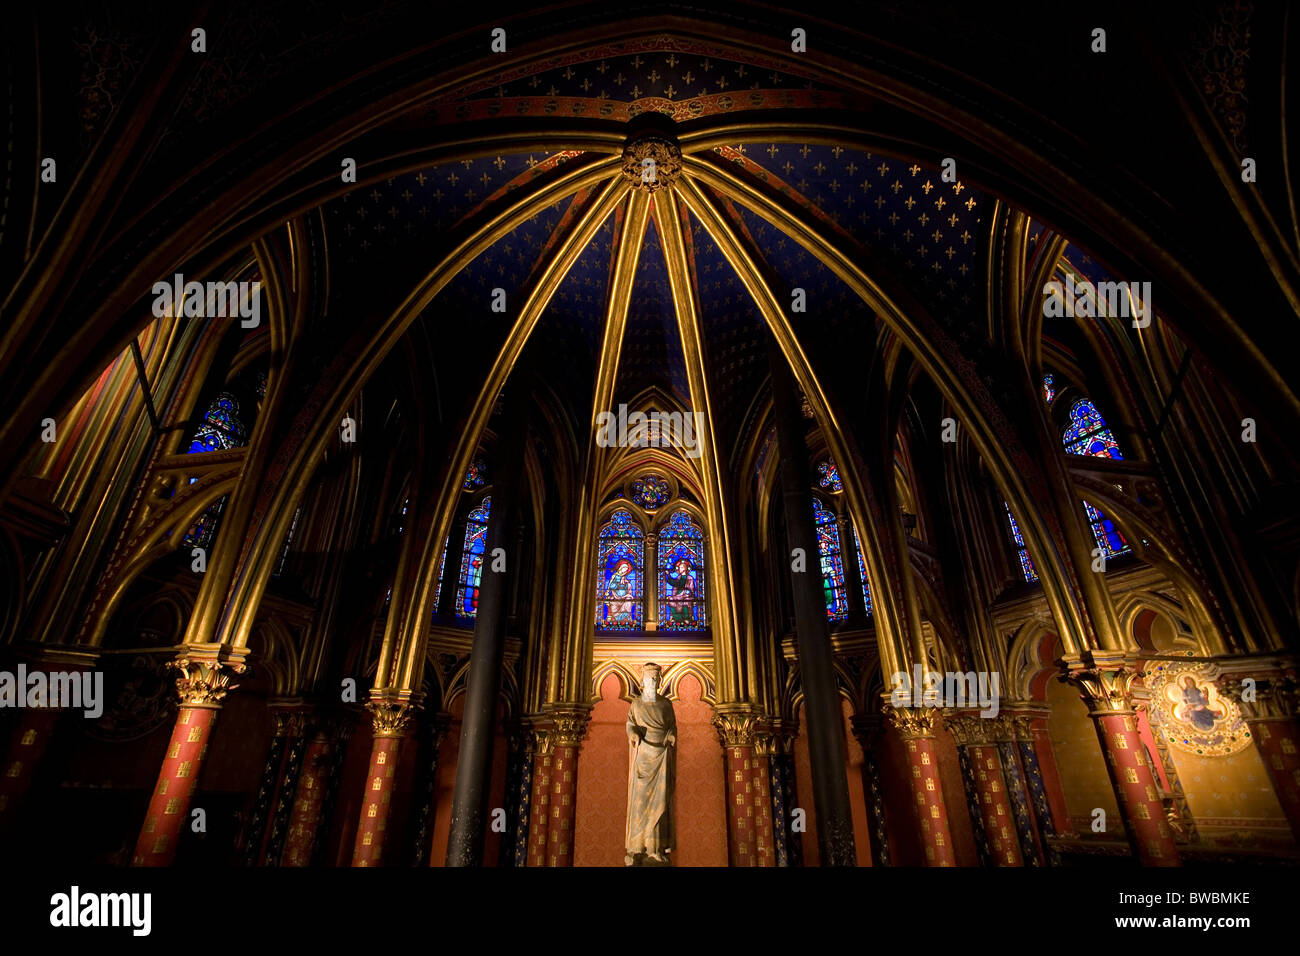 Vaulted ceiling painted and stained glass windows in Sainte-Chapelle Stock Photo